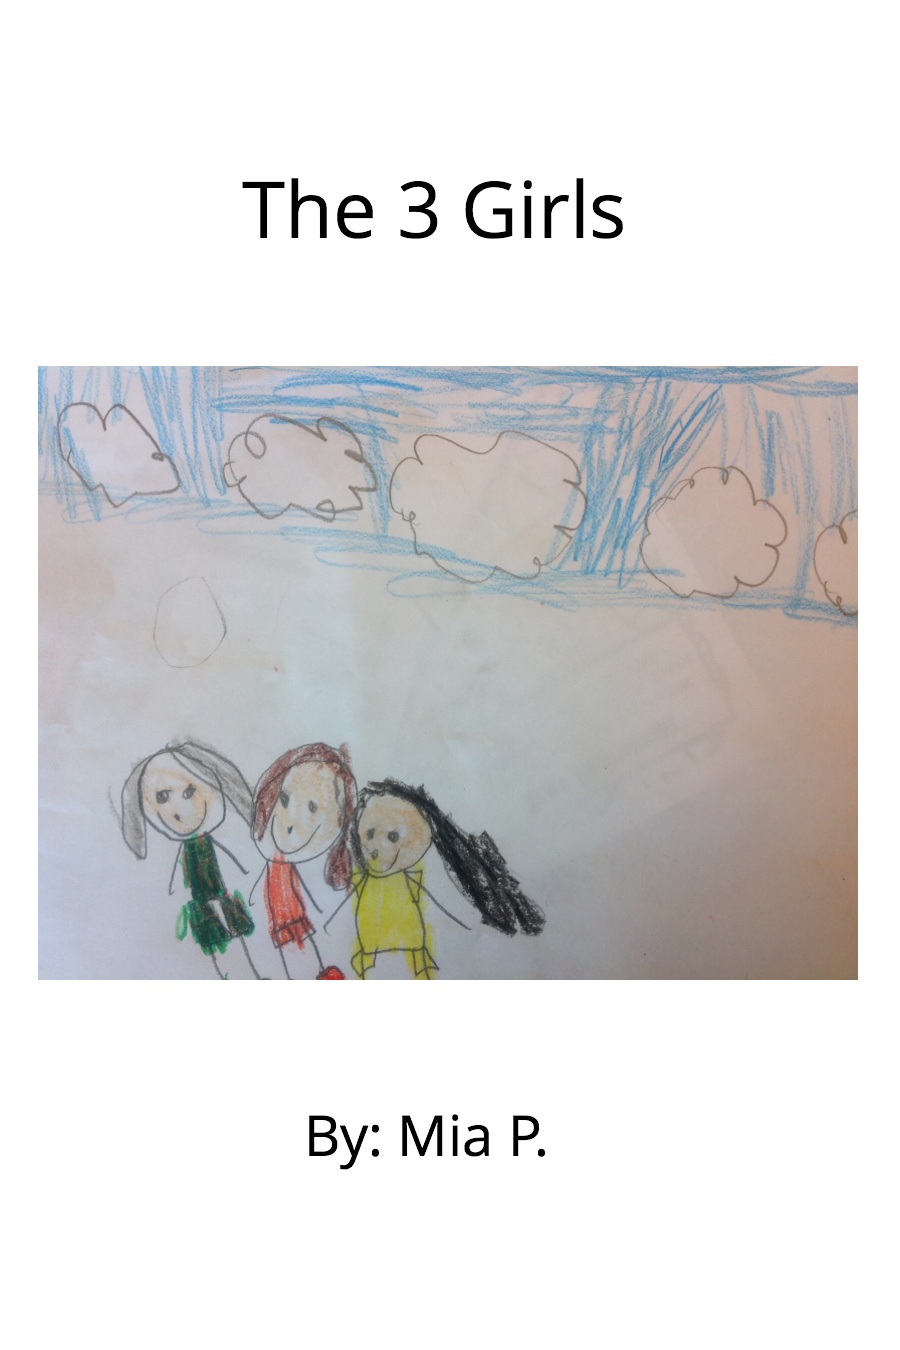 The 3 Girls by Mia P